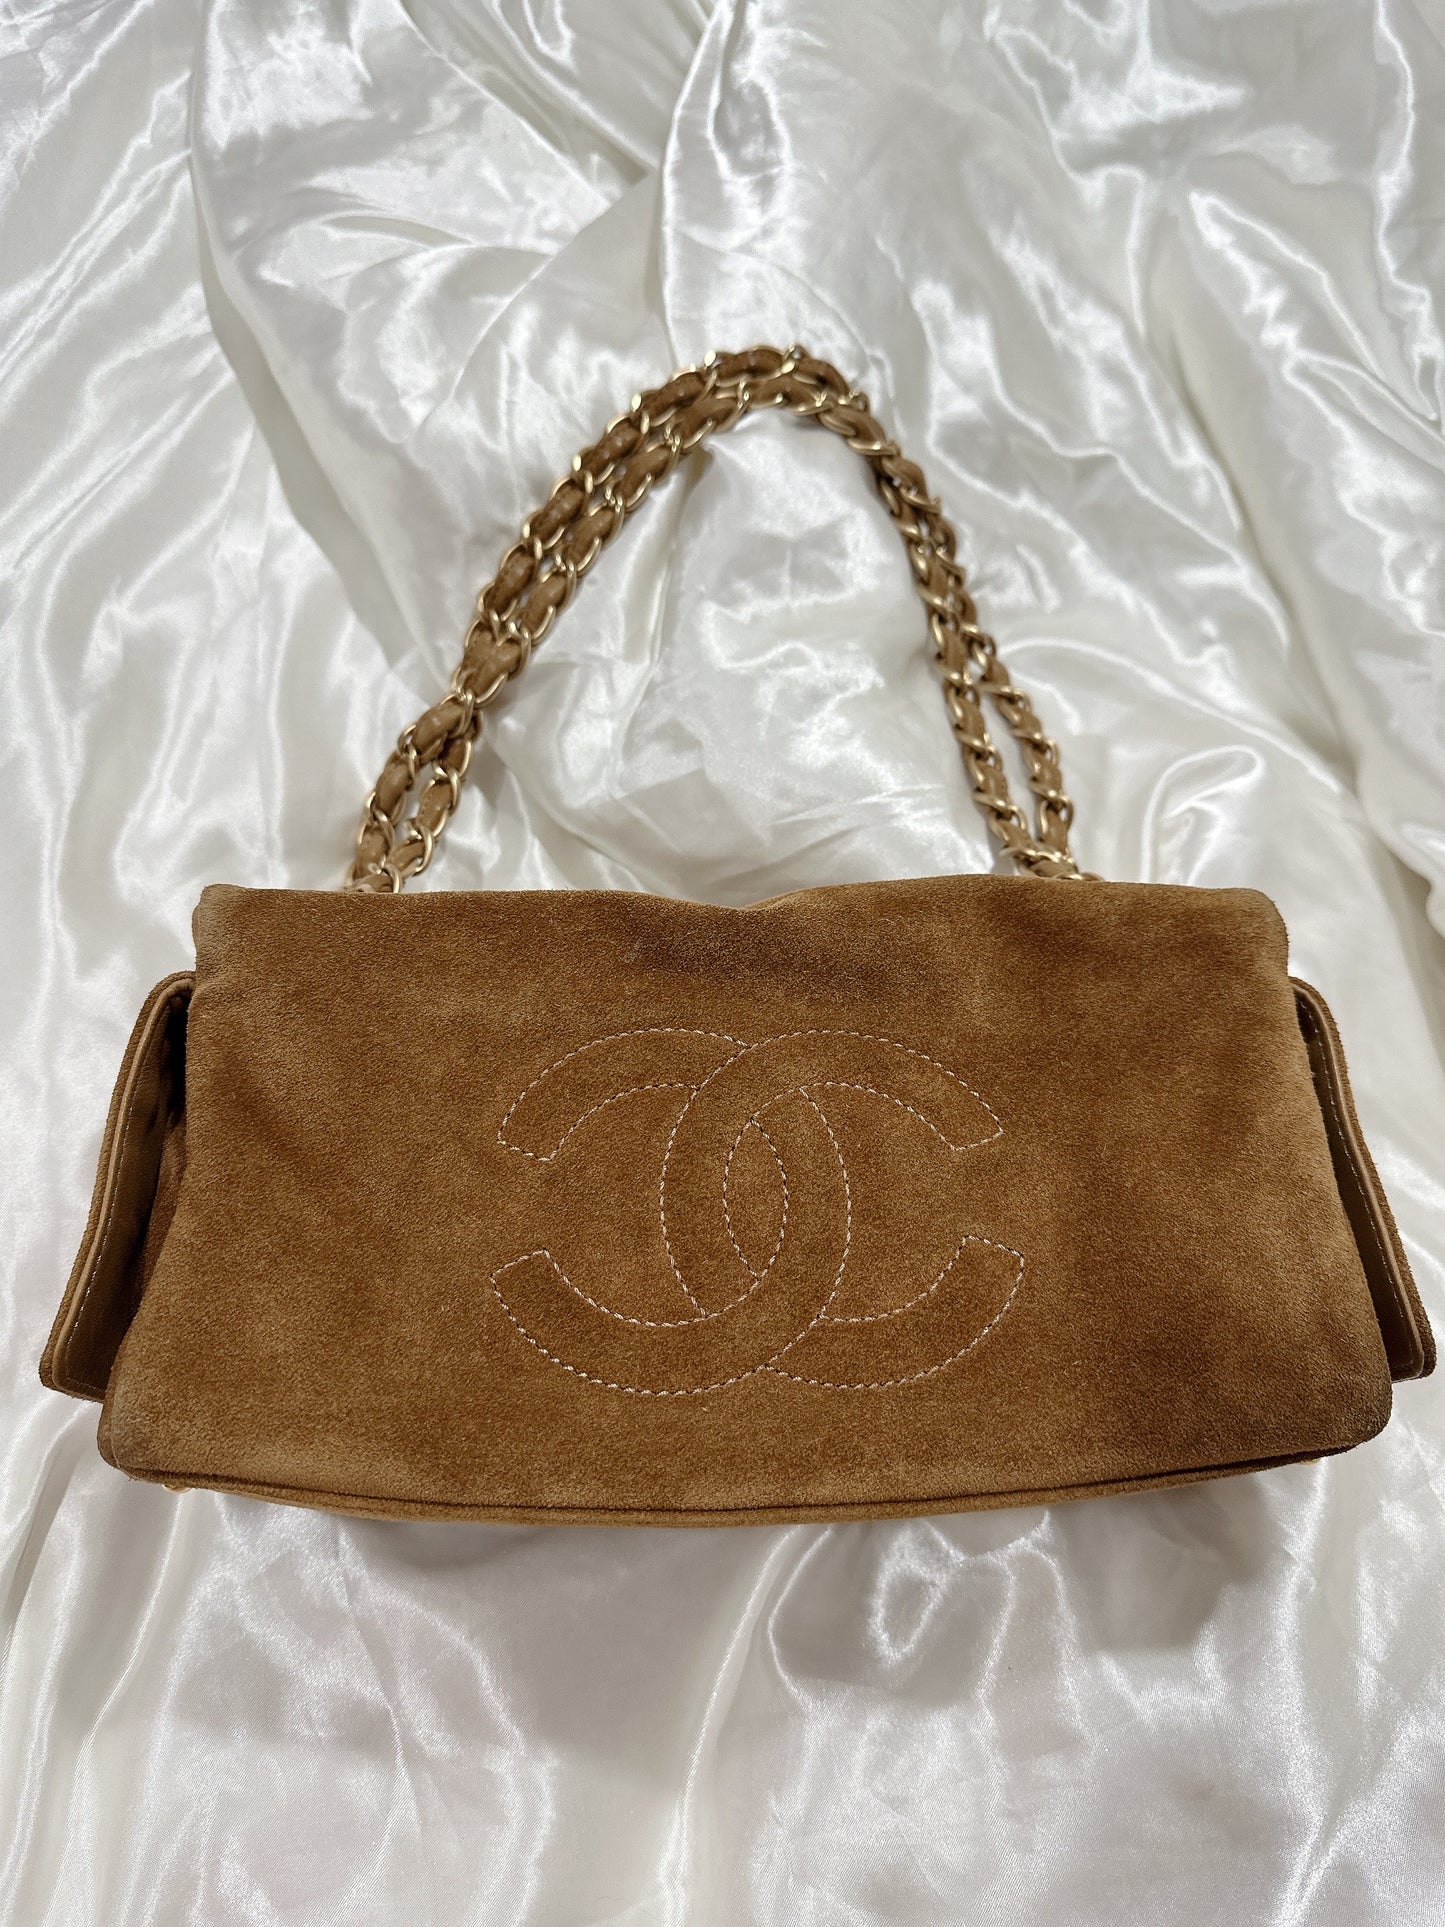 Chanel suede bag 咖啡麂皮方包 - STAY PURE